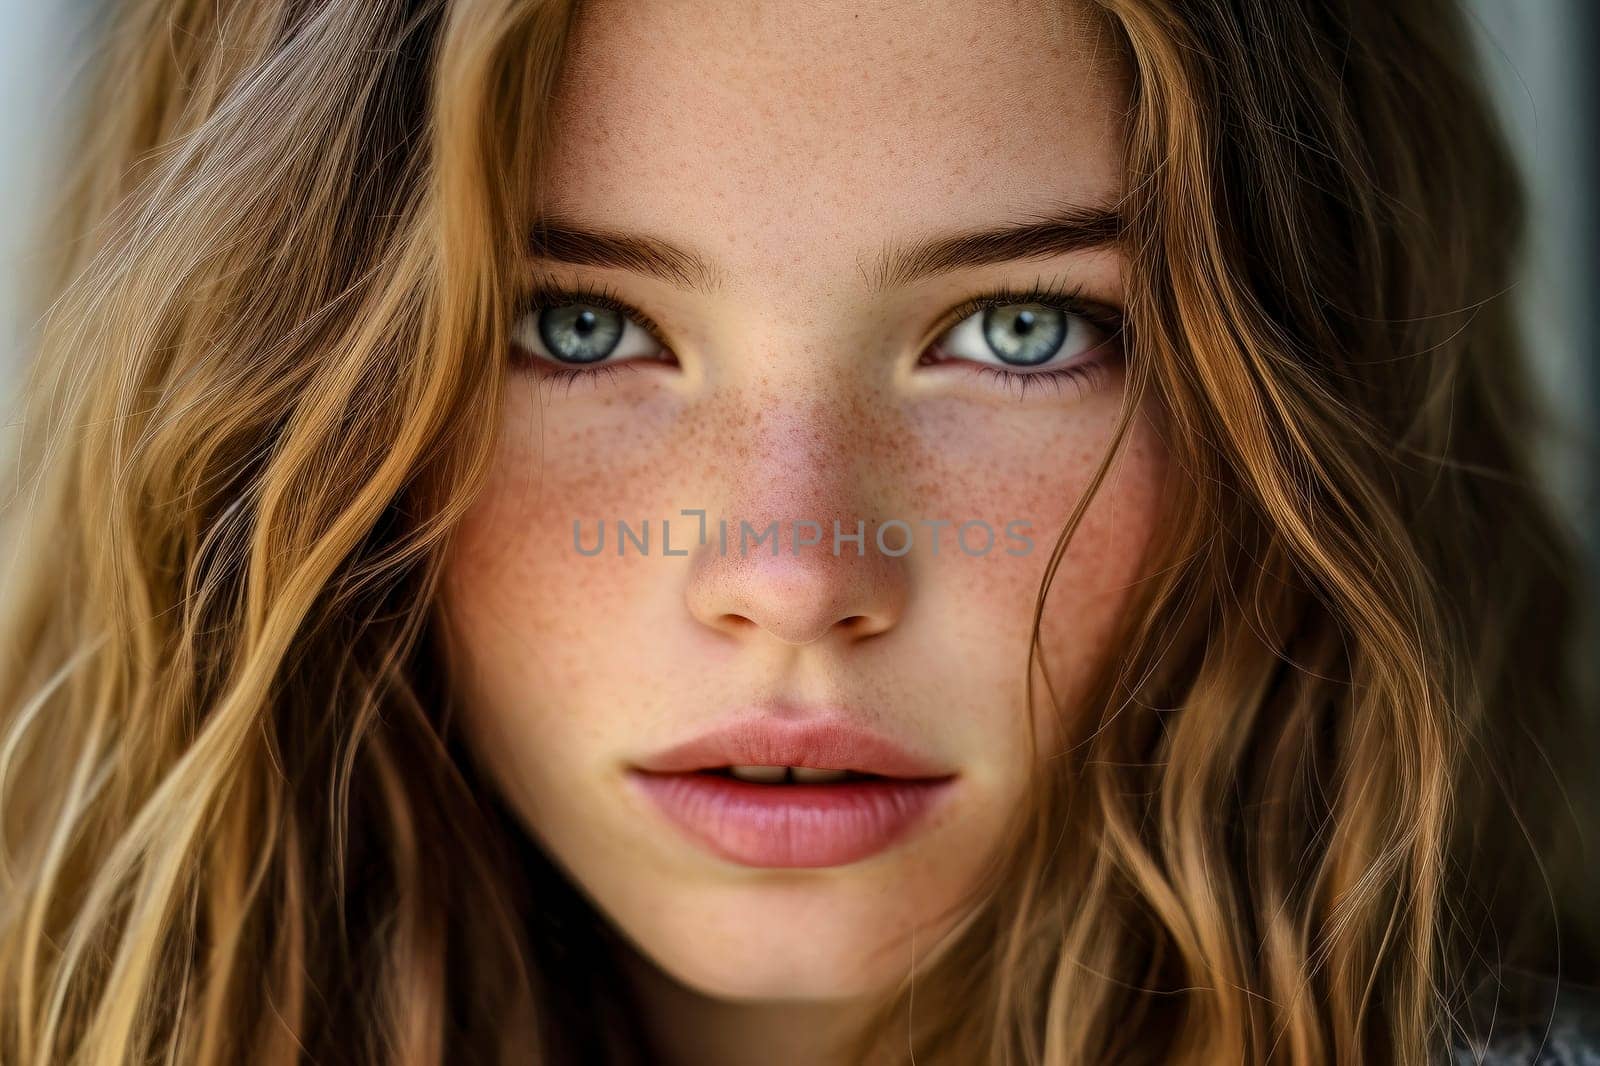 Captivating Close-up of a Beautiful Teenage Girl with Deep Gaze by pippocarlot